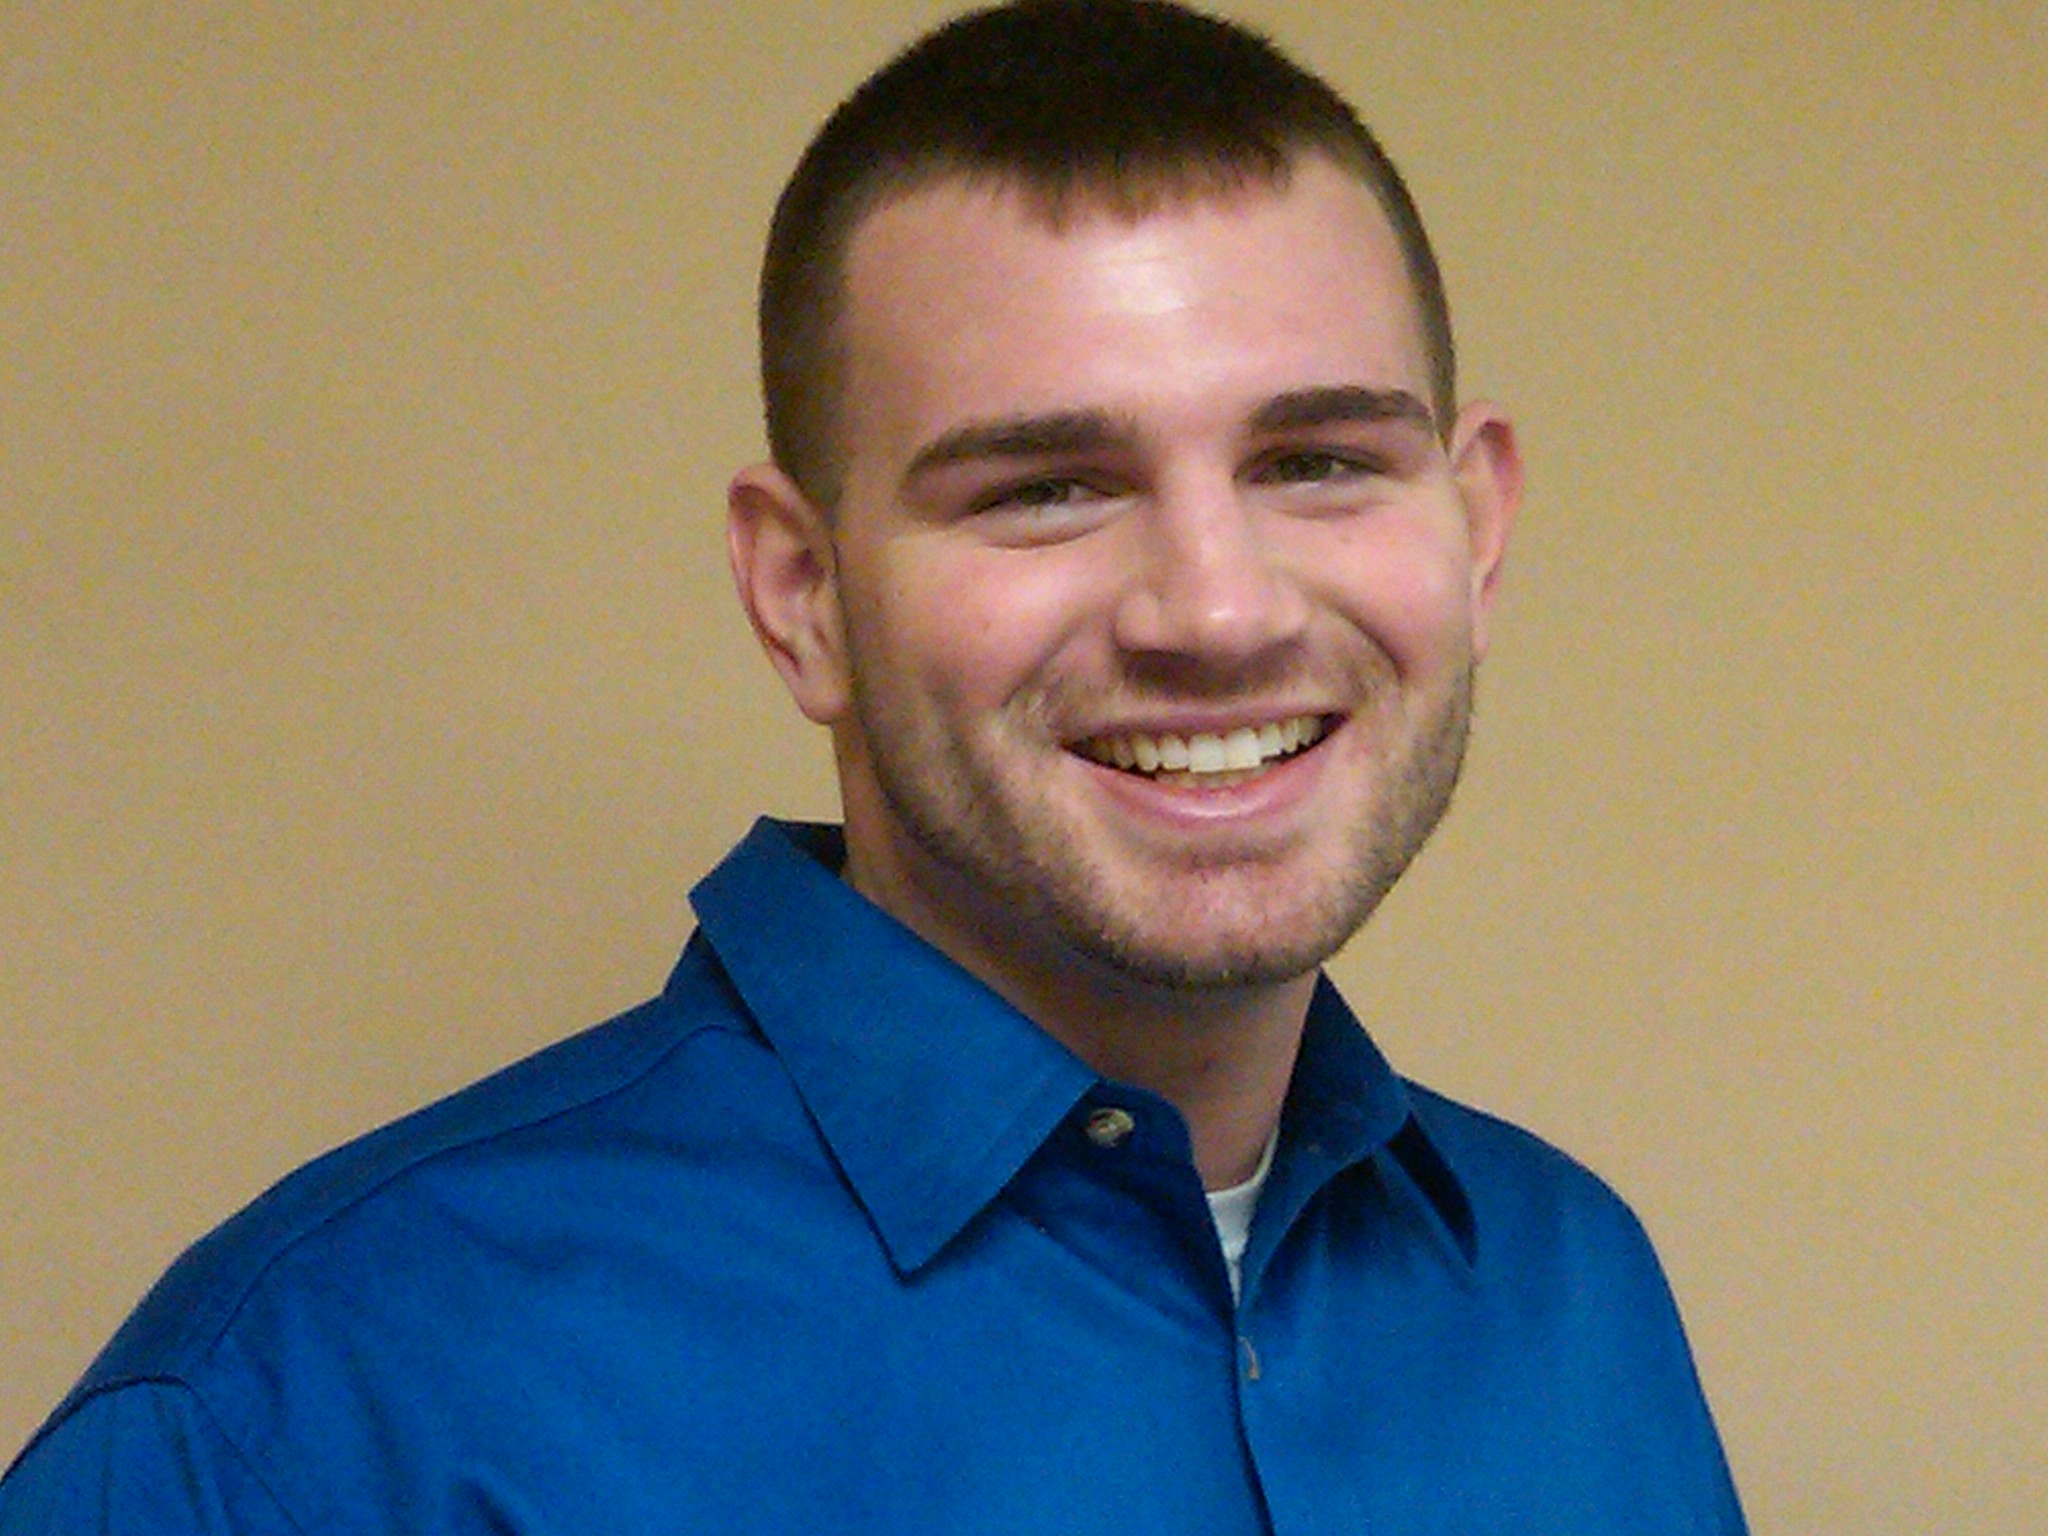 Brian Barresi - Assistant Project Manager